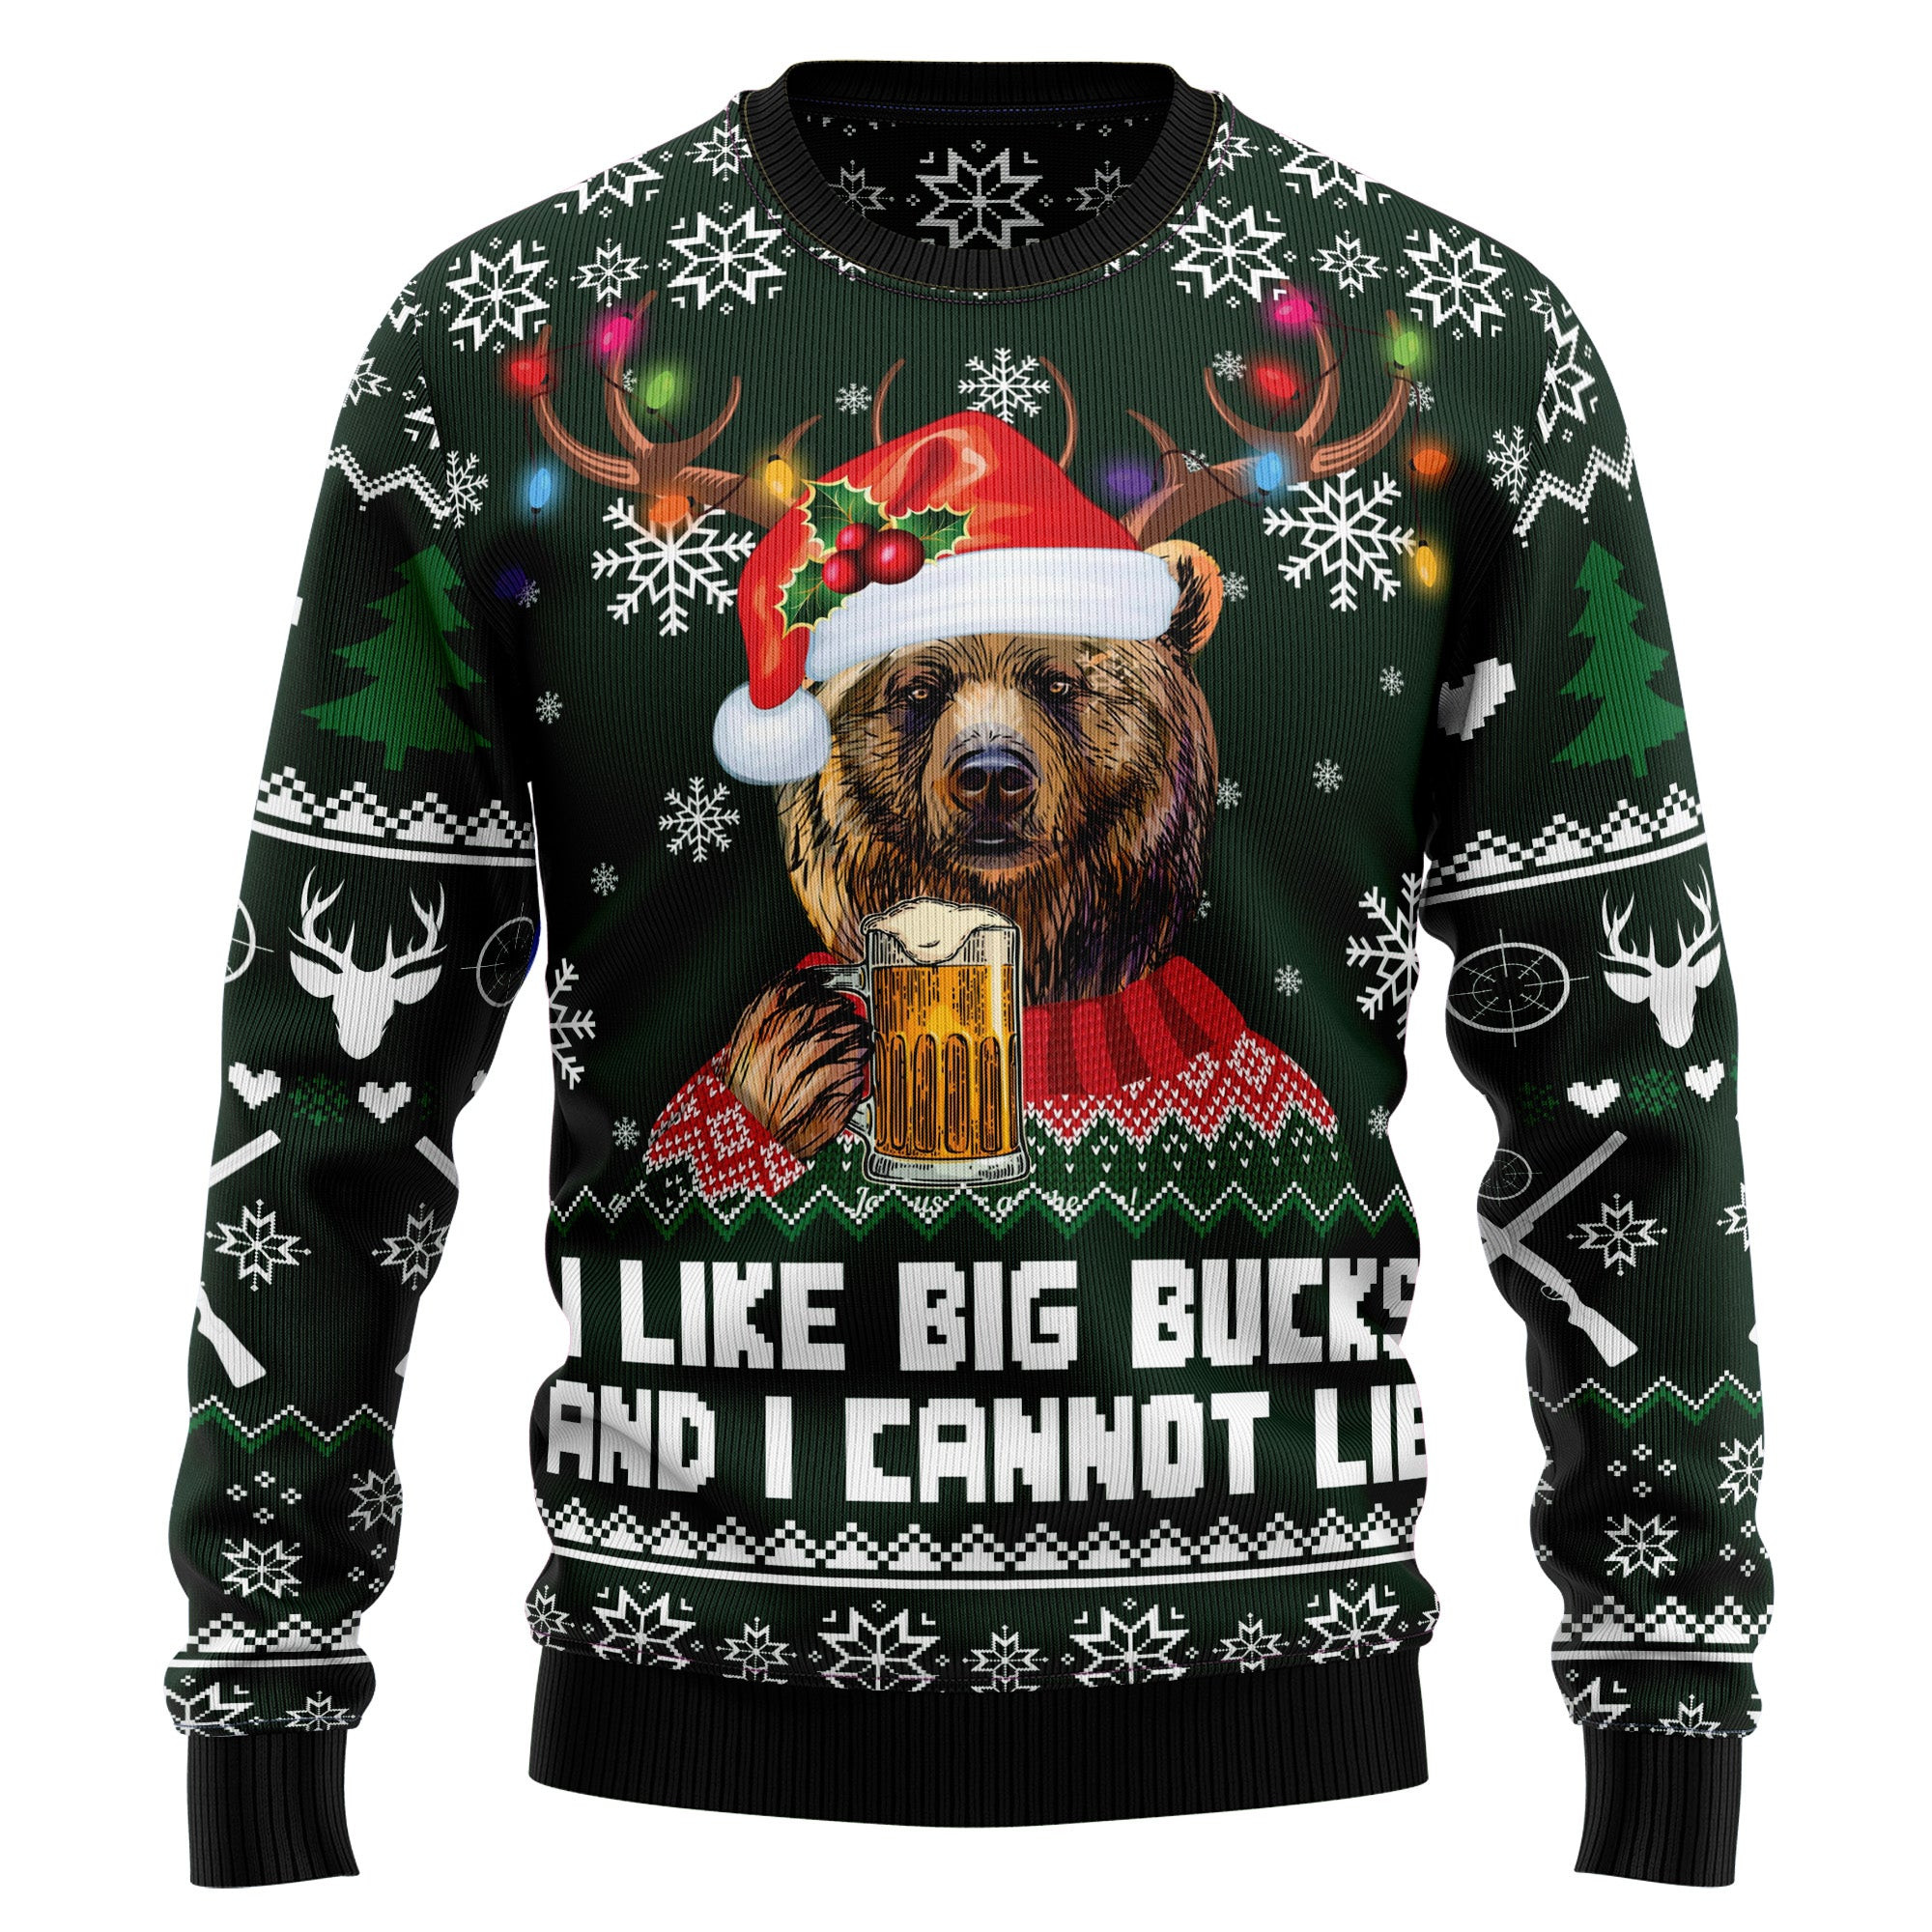 Bear Hunting and Beer Ugly Christmas Sweater, Ugly Sweater For Men Women, Holiday Sweater